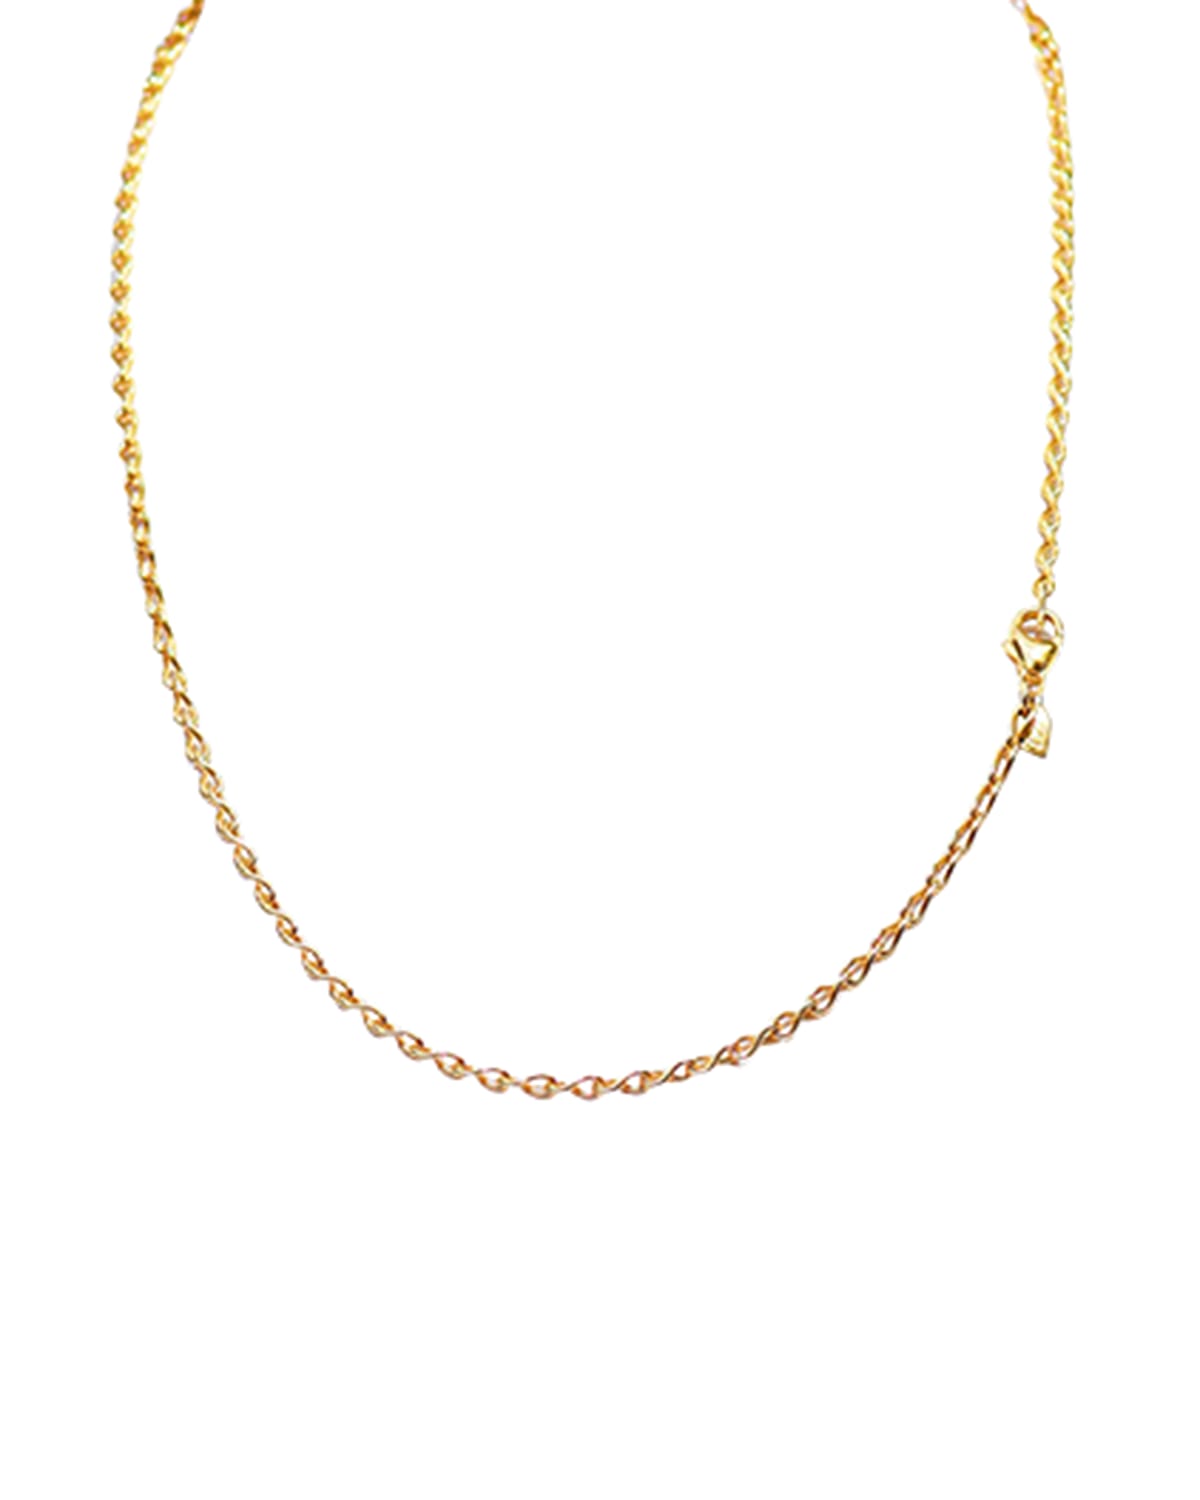 18K Yellow Gold Eight Chain, 20"L